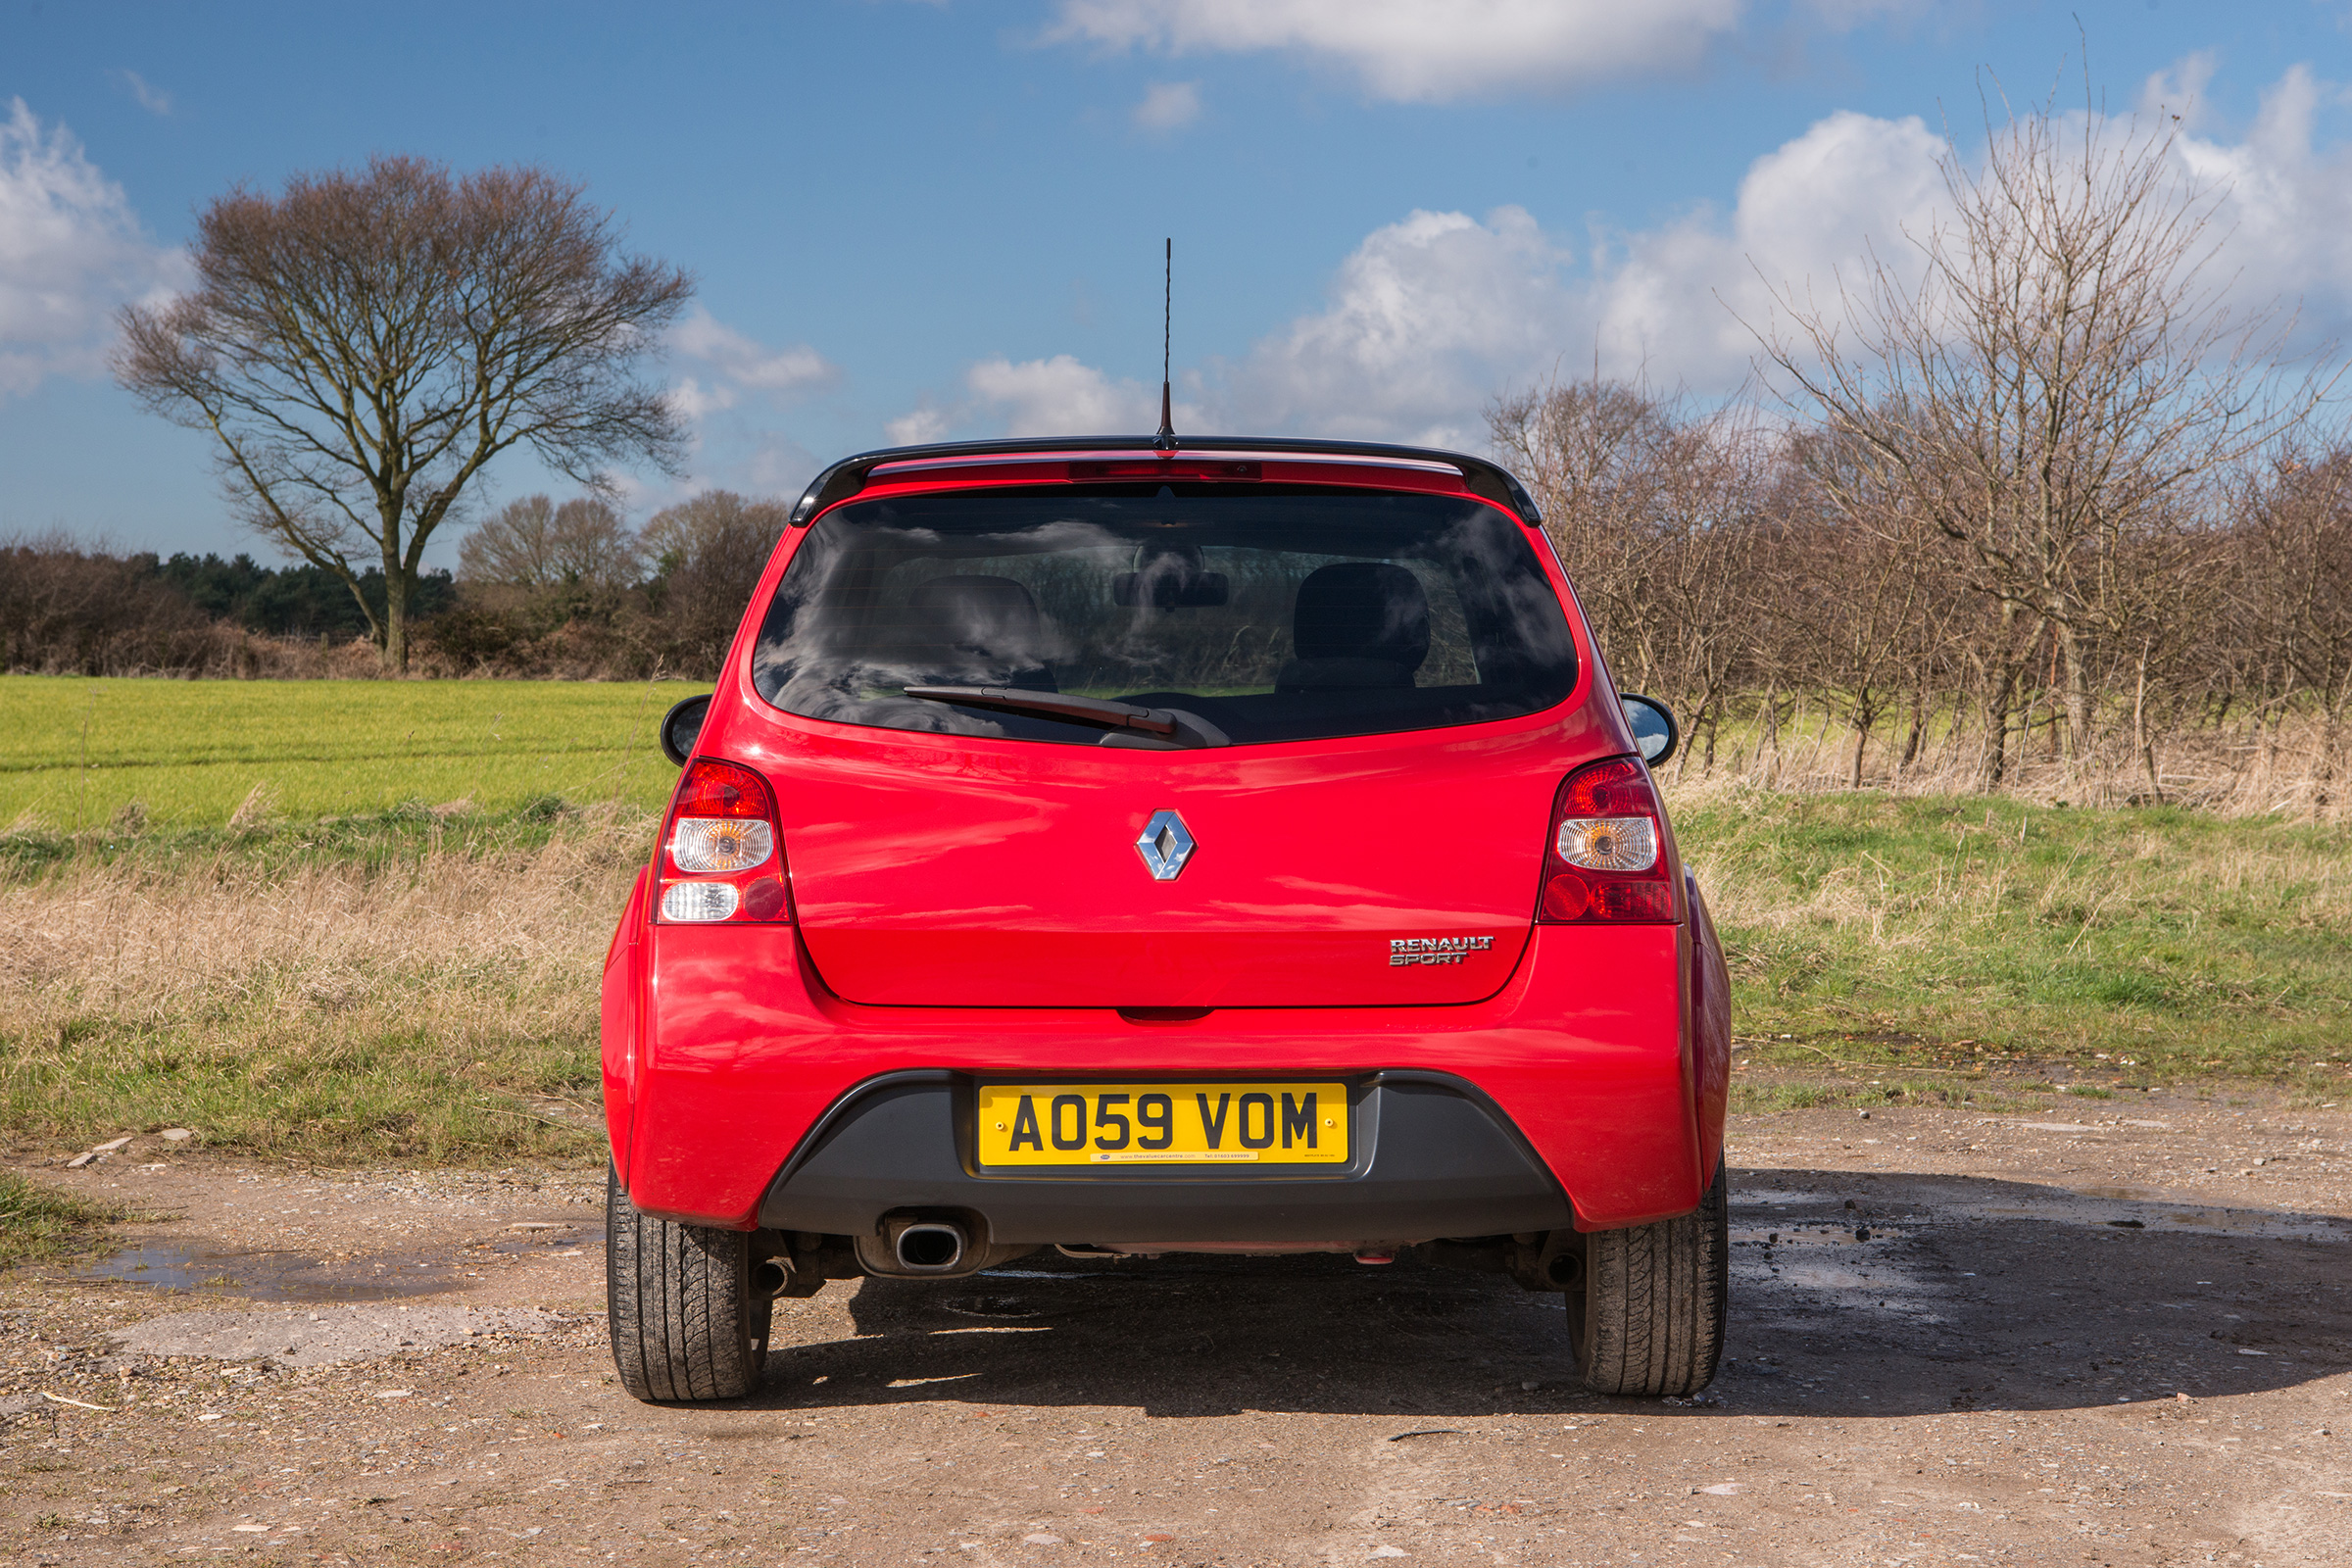 Used Renault Twingo 2008-2013 review